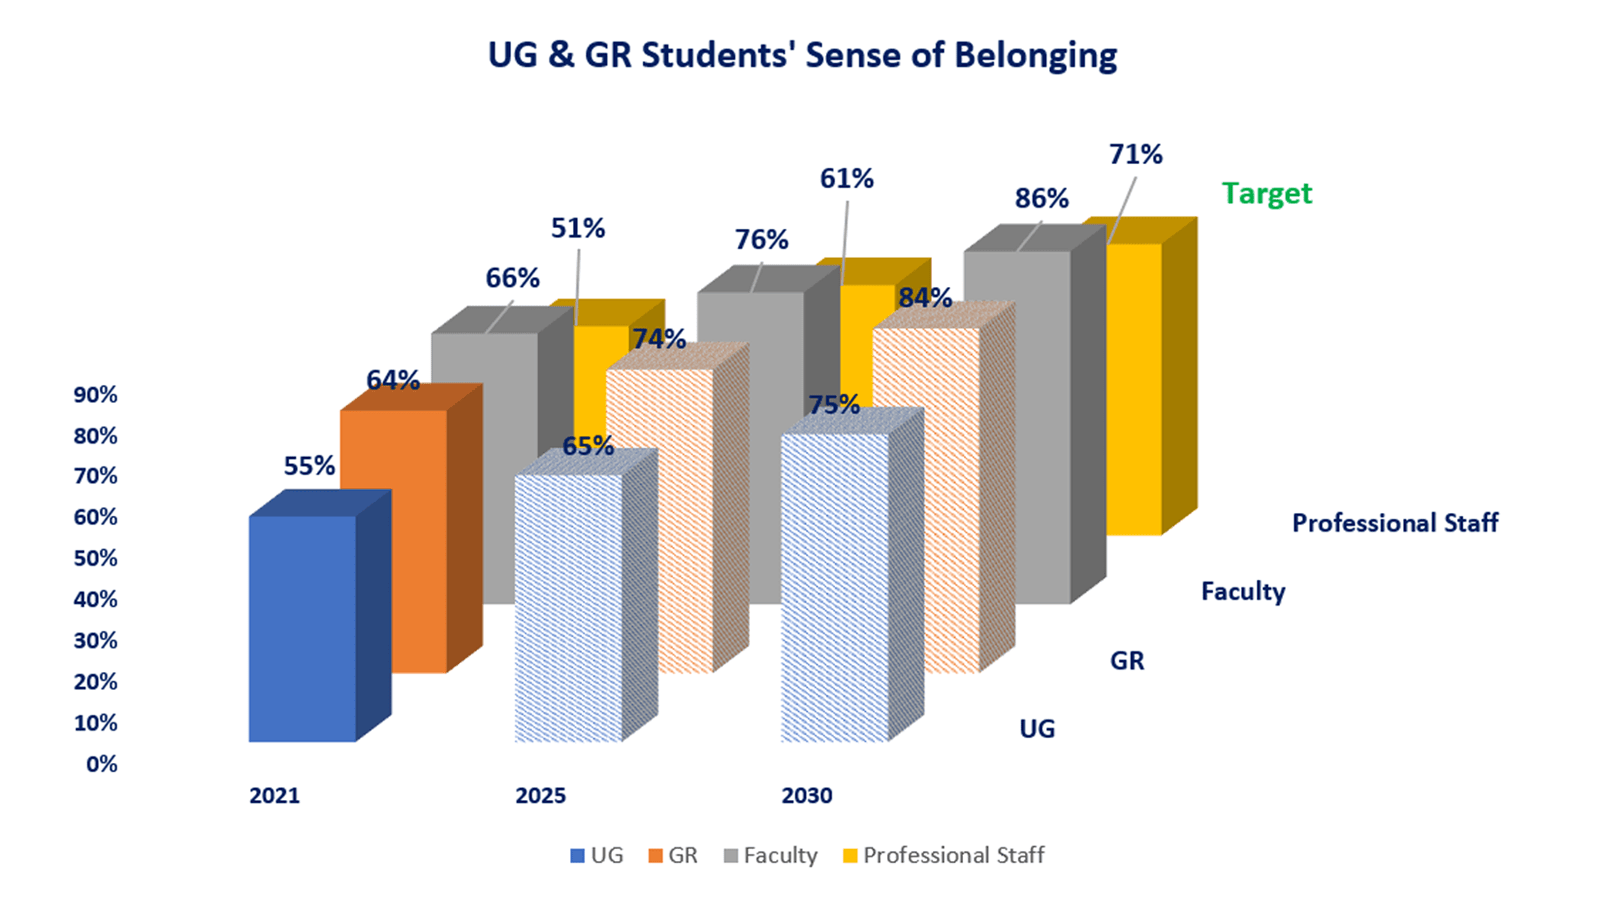 Results from Drexel University’s 2021 climate survey showed that 58 percent of all respondents (n=1,810) were either generally satisfied or very satisfied with their sense of belonging or community on campus. When examined by group, 55 percent of undergraduate students, 64 percent of graduate students, 66 percent of faculty, and 51 percent of professional staff were either generally satisfied or very satisfied with their sense of belonging.  The goal of the Culture of Equity Imperative is to increase the percent of respondents who report being generally satisfied or very satisfied with their sense of belonging by 20 points to 75 percent for undergraduate students, 84 percent for graduate students, 86 percent for faculty, and 71 percent for professional staff.